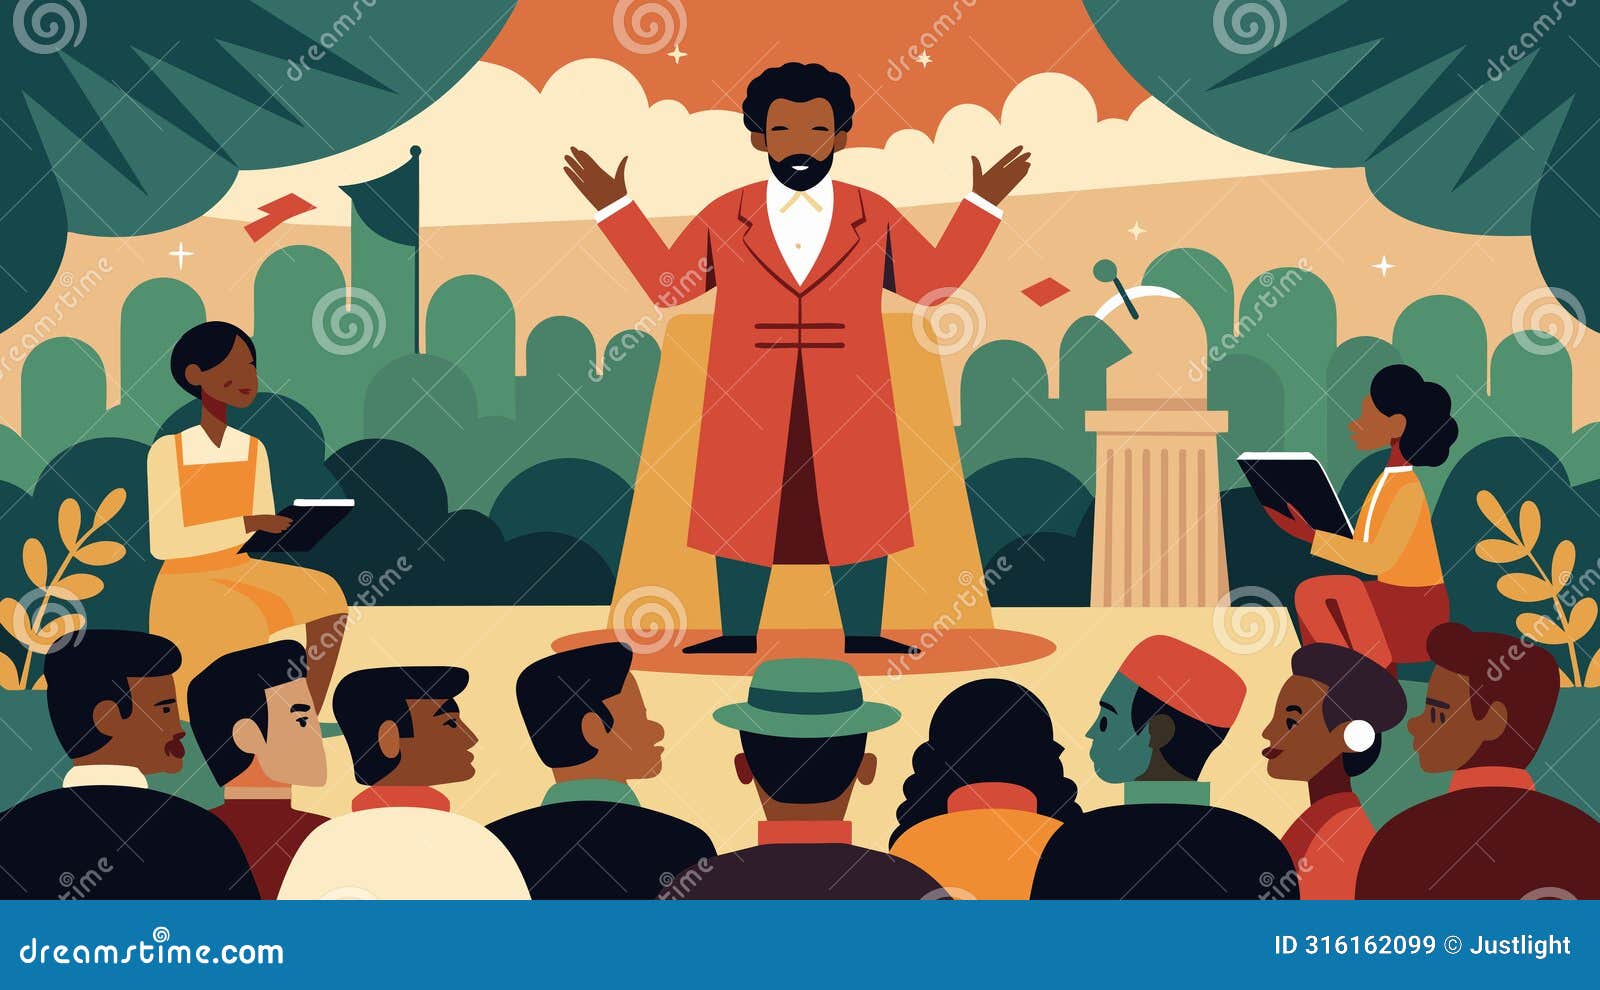 an openair theater showcases a reenactment of a moving speech given by a prominent africanamerican figure during the